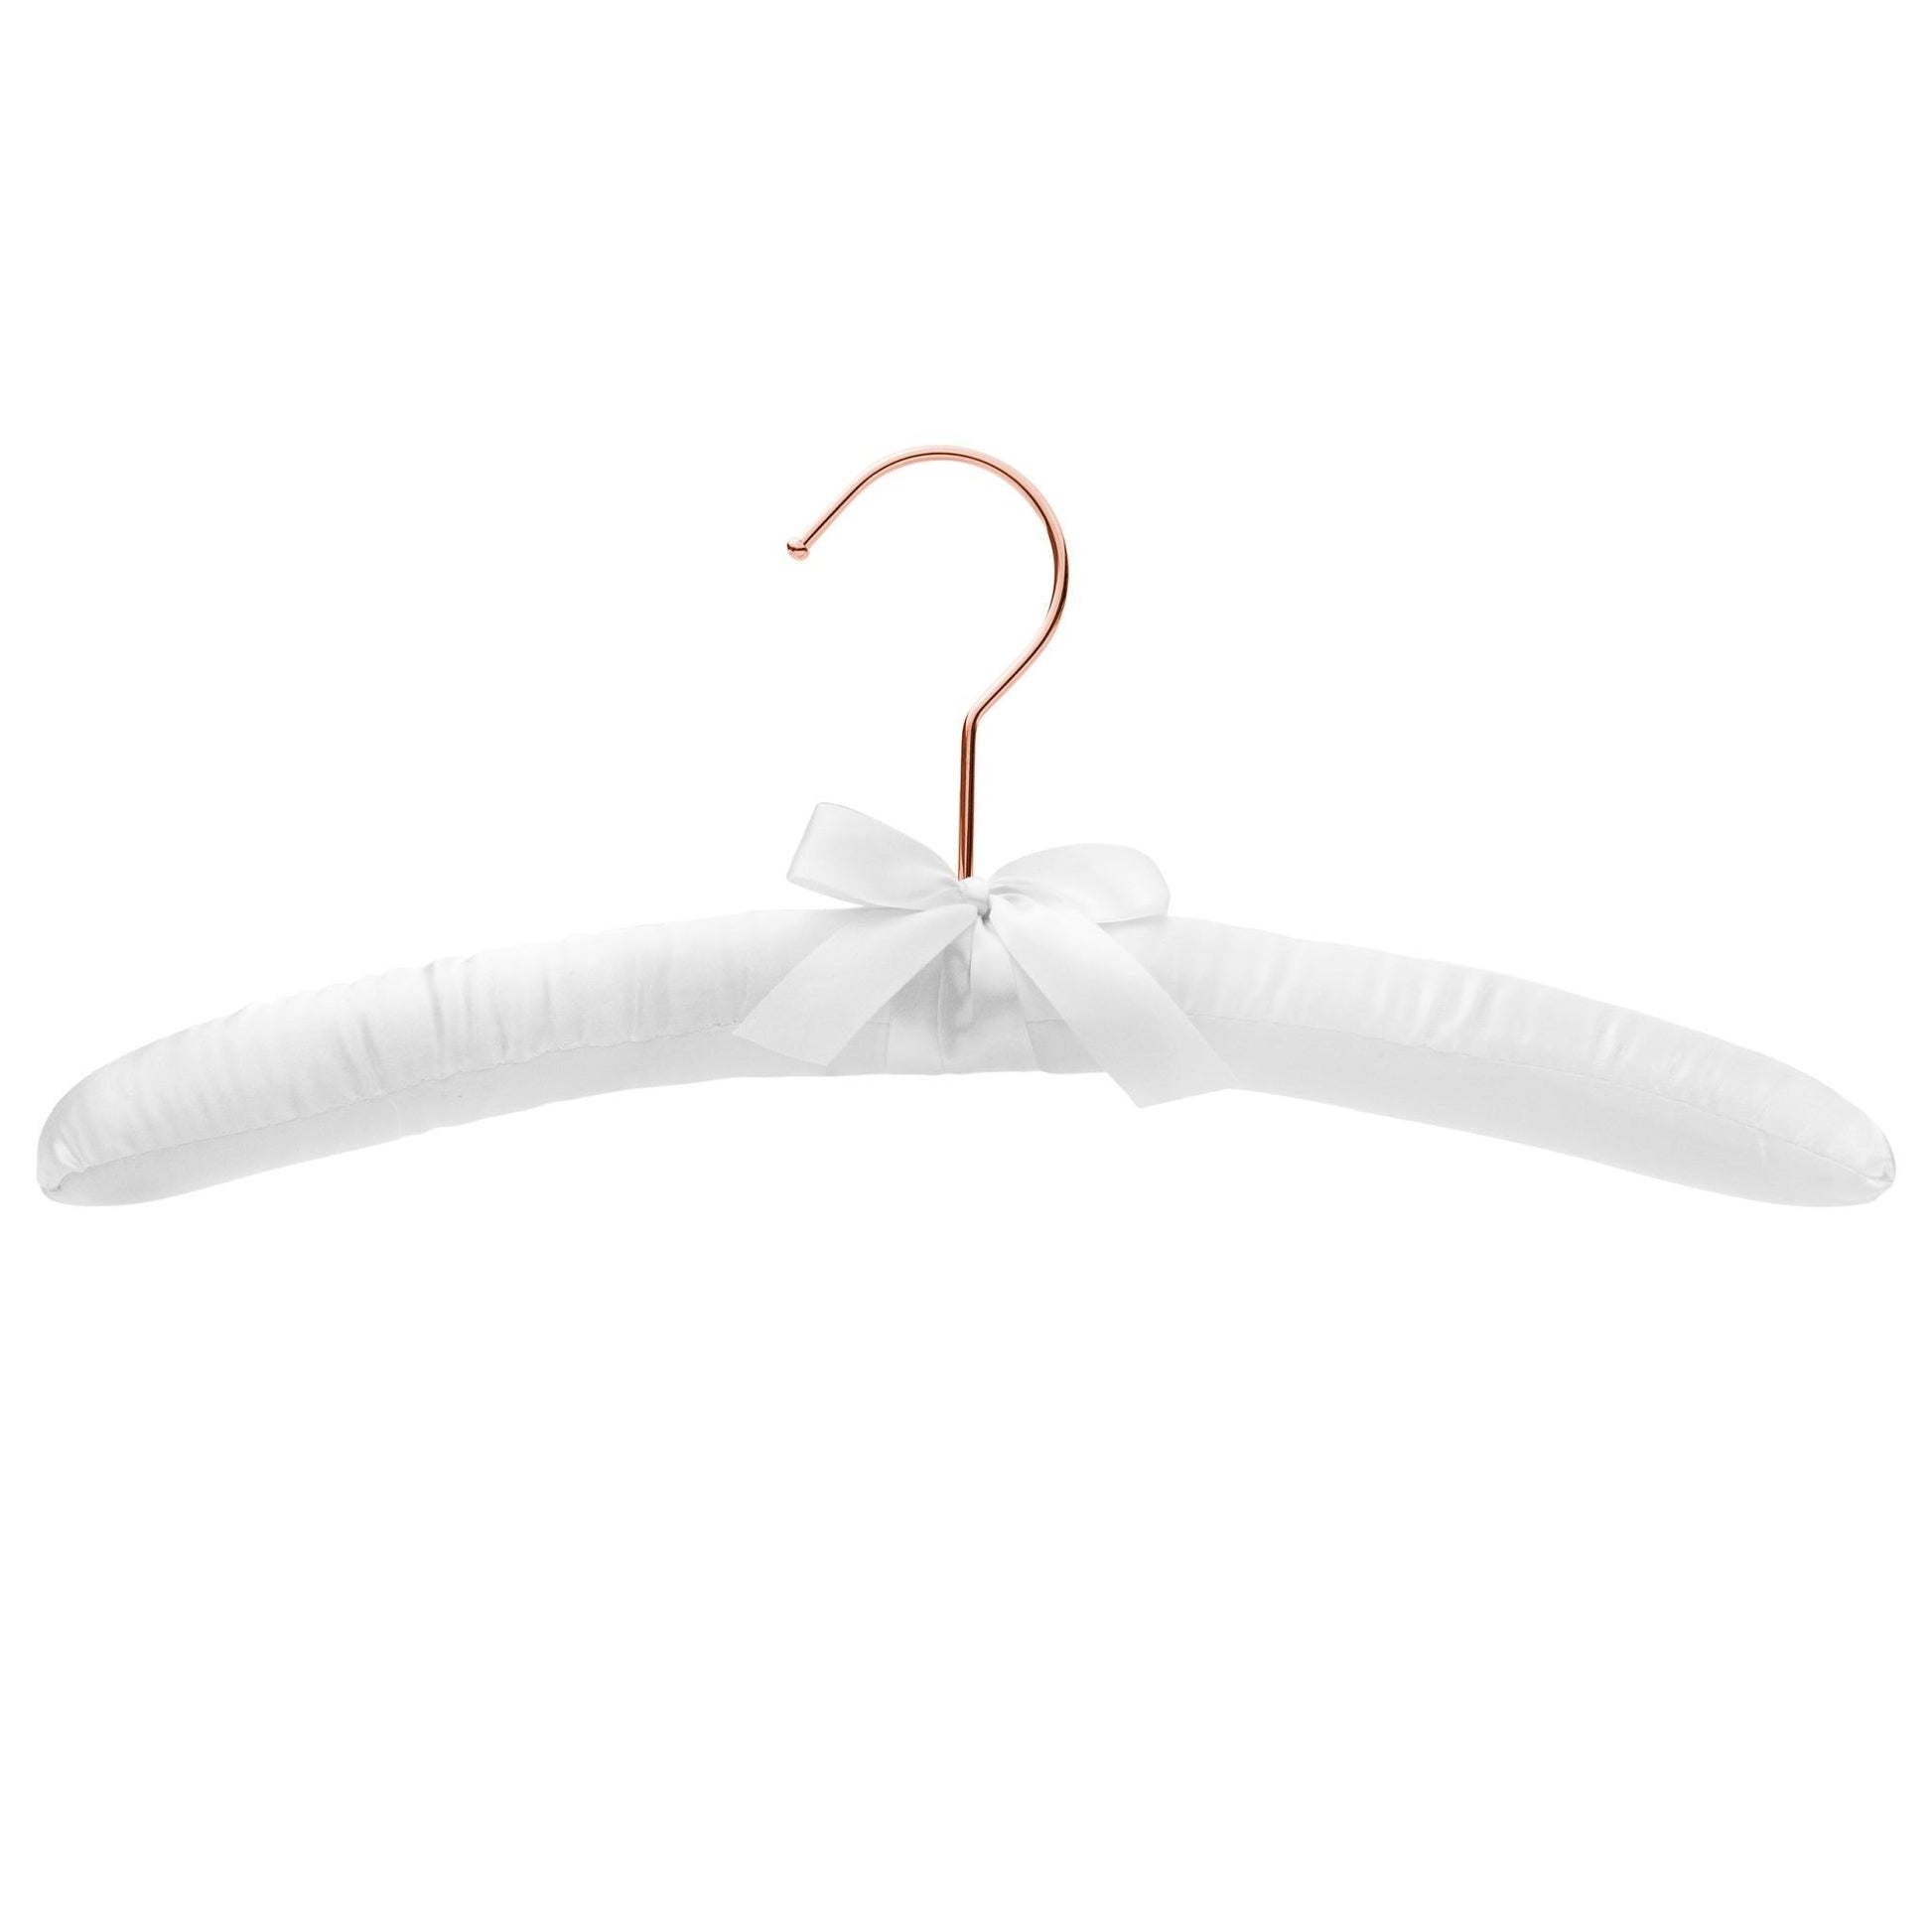 Padded Coat Hangers With Rose Gold Hook - White Satin - 38cm X 45mm Thick (Sold in Bundles of 20/50) - Hangersforless